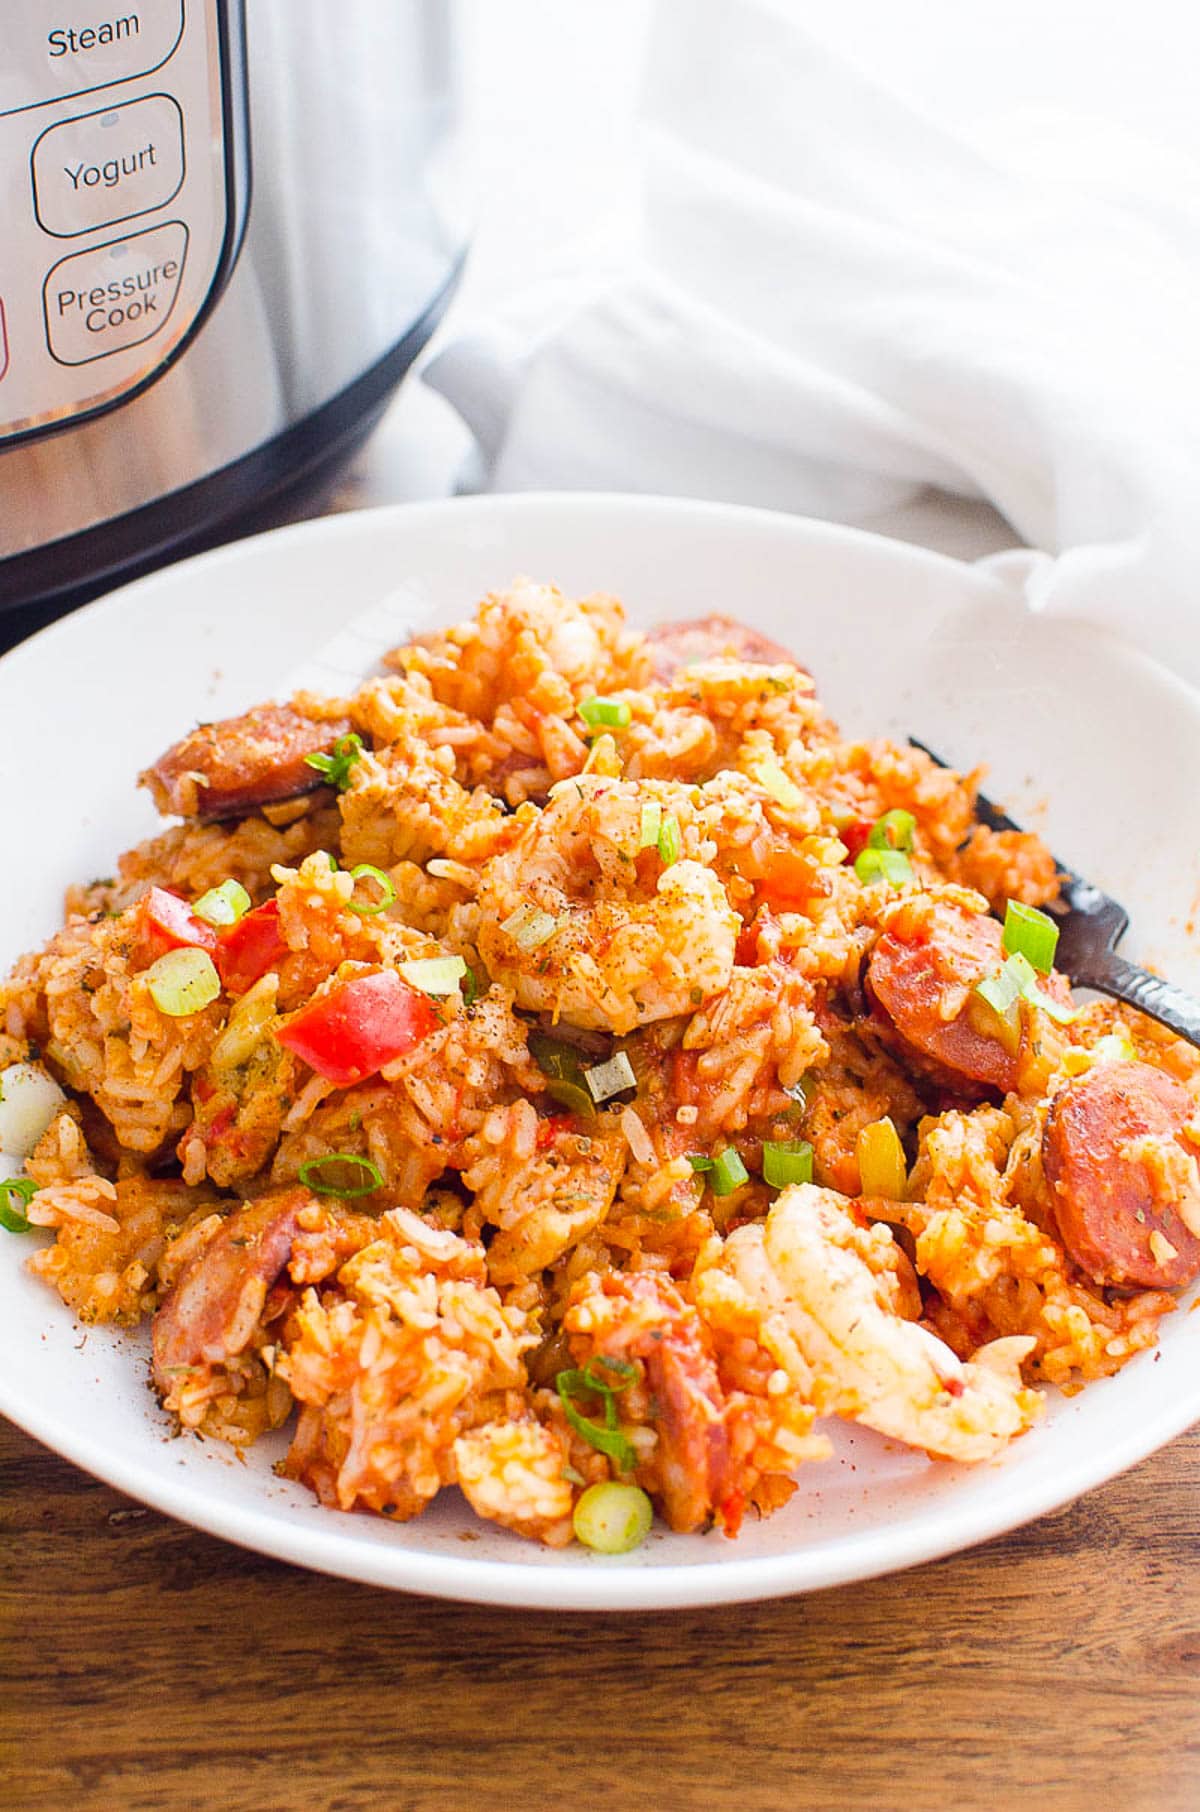 Instant pot Jambalaya garnished with green onion and served on white plate with a fork.